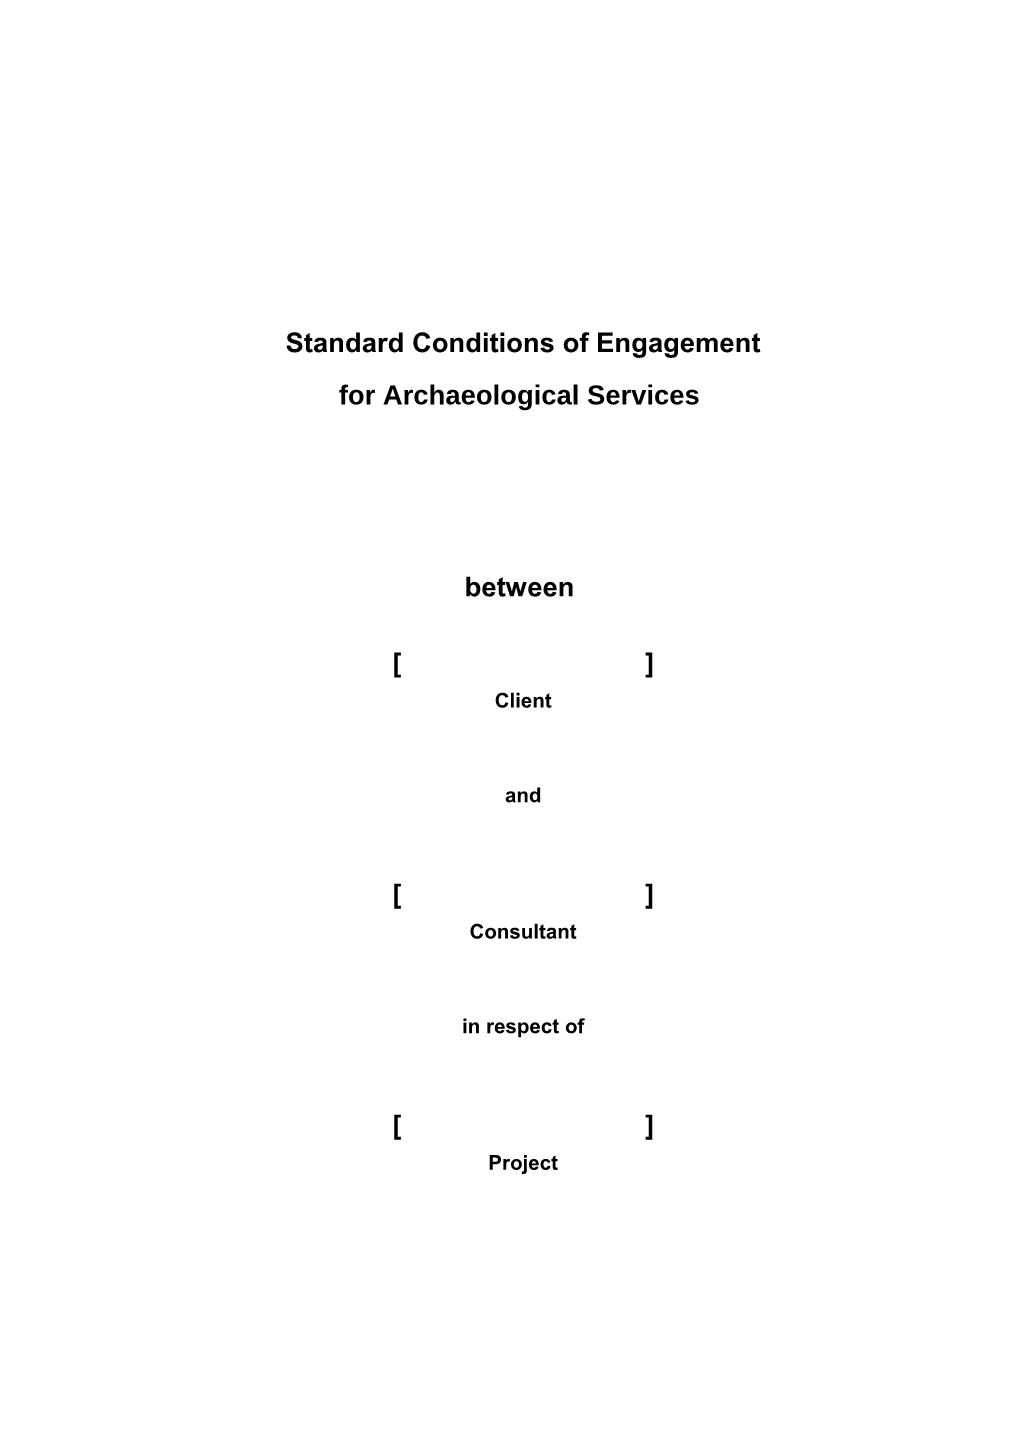 Standard Conditions of Engagement for Archaeological Services